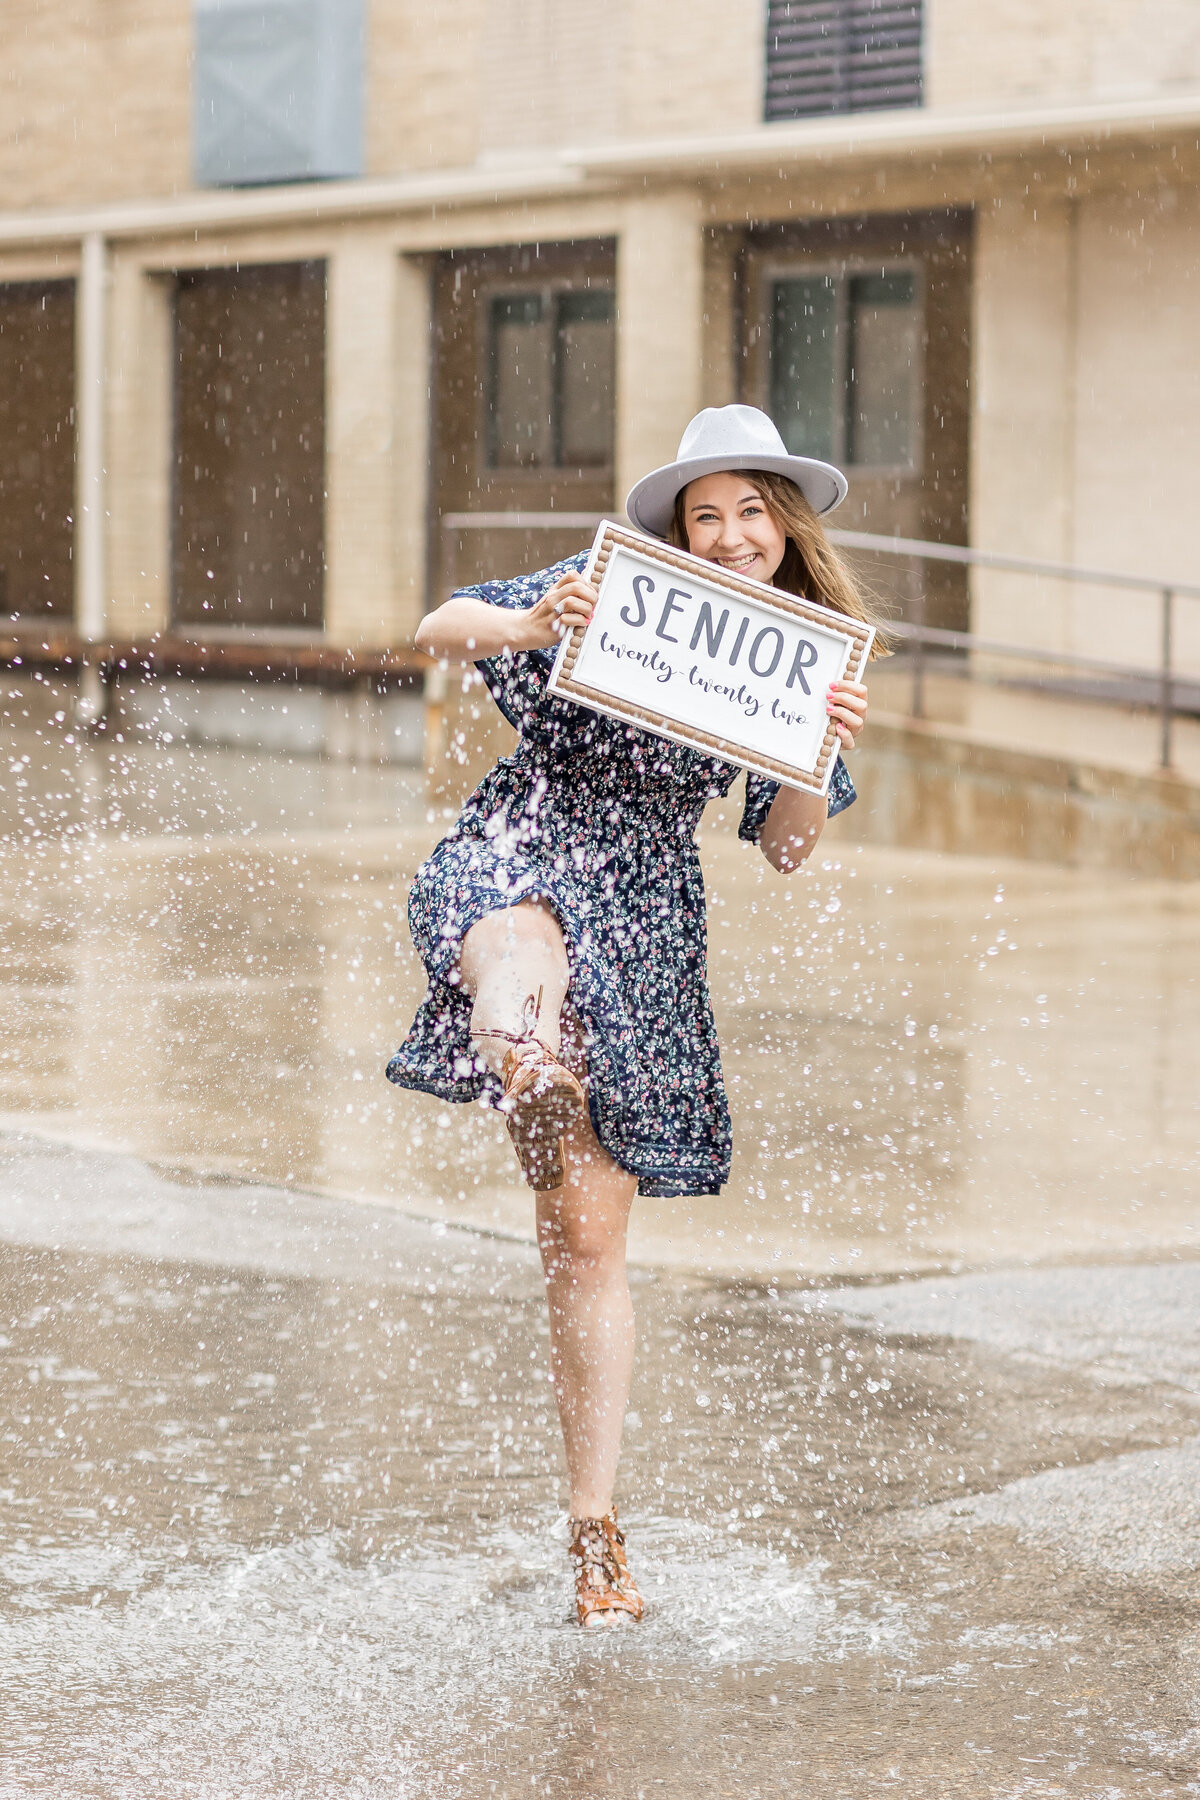 a girl holding a sign with her graduation  year and kicking water in the rain